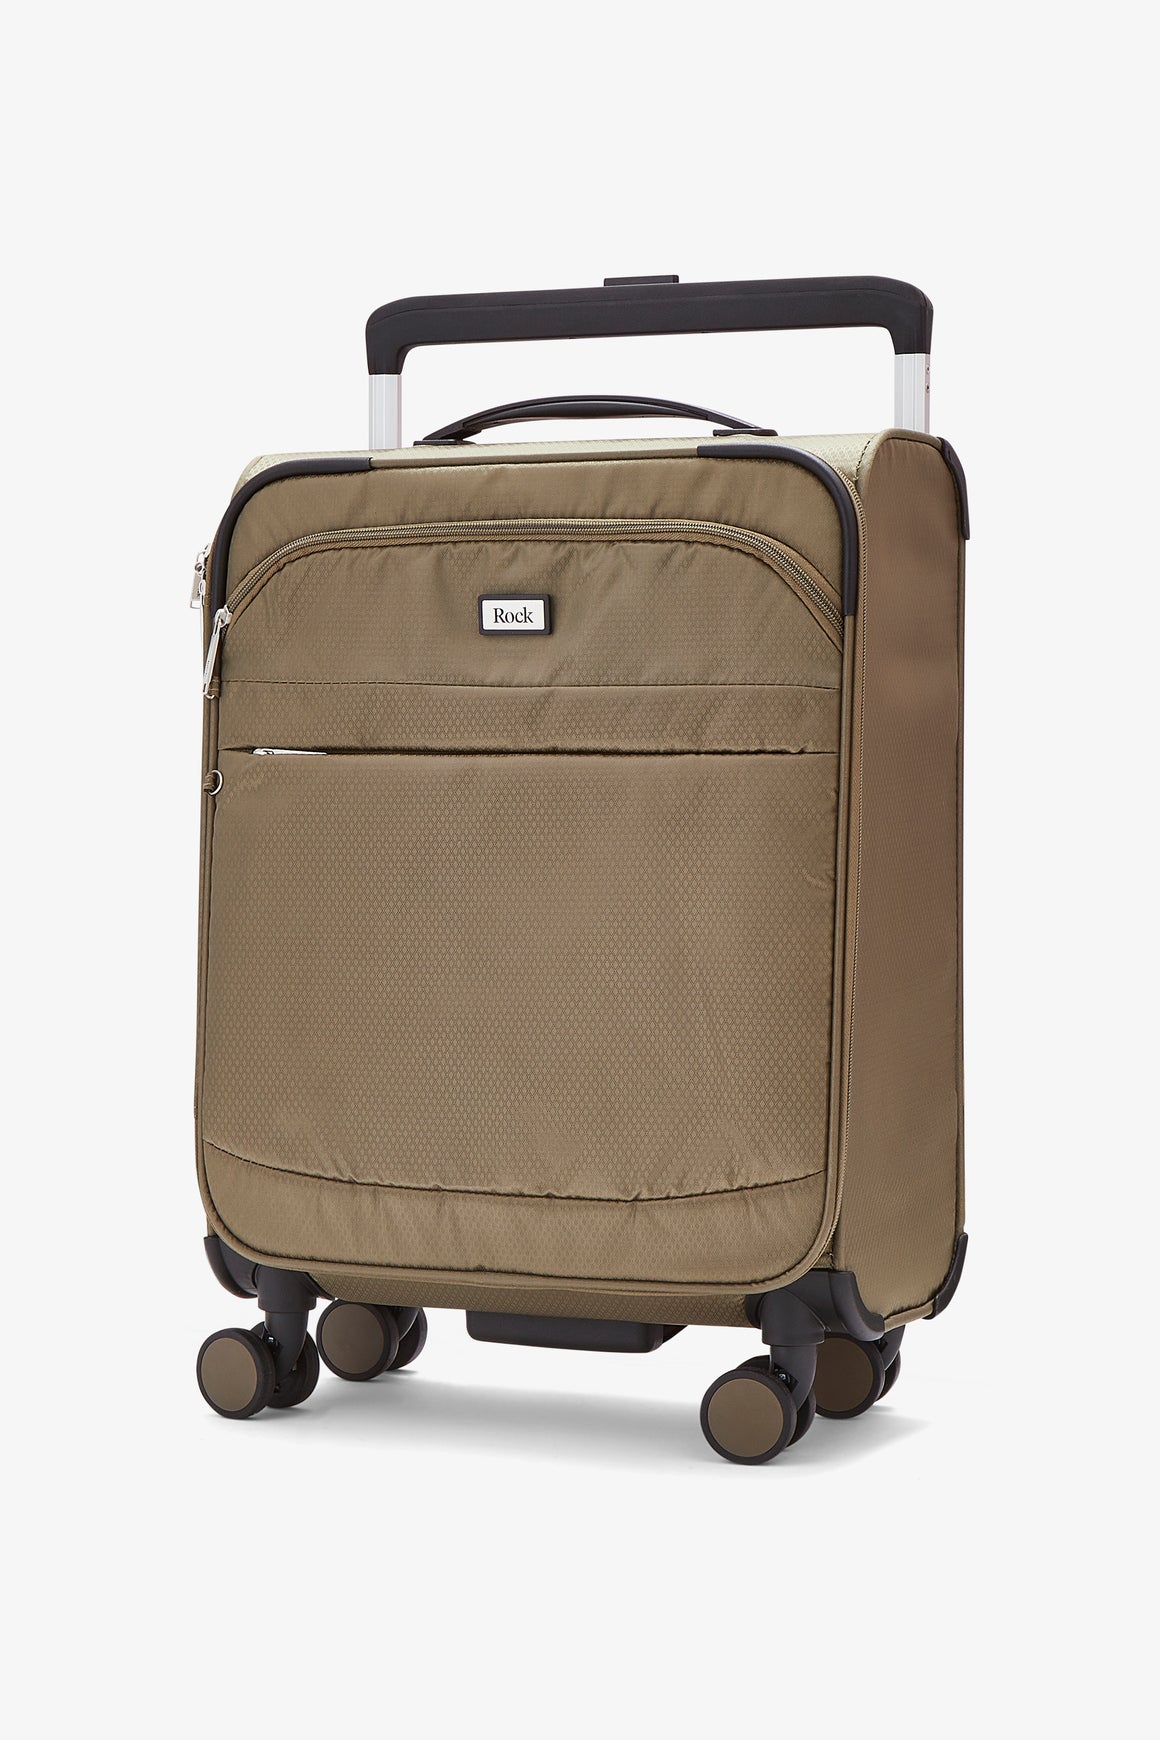 Rocklite Small Suitcase